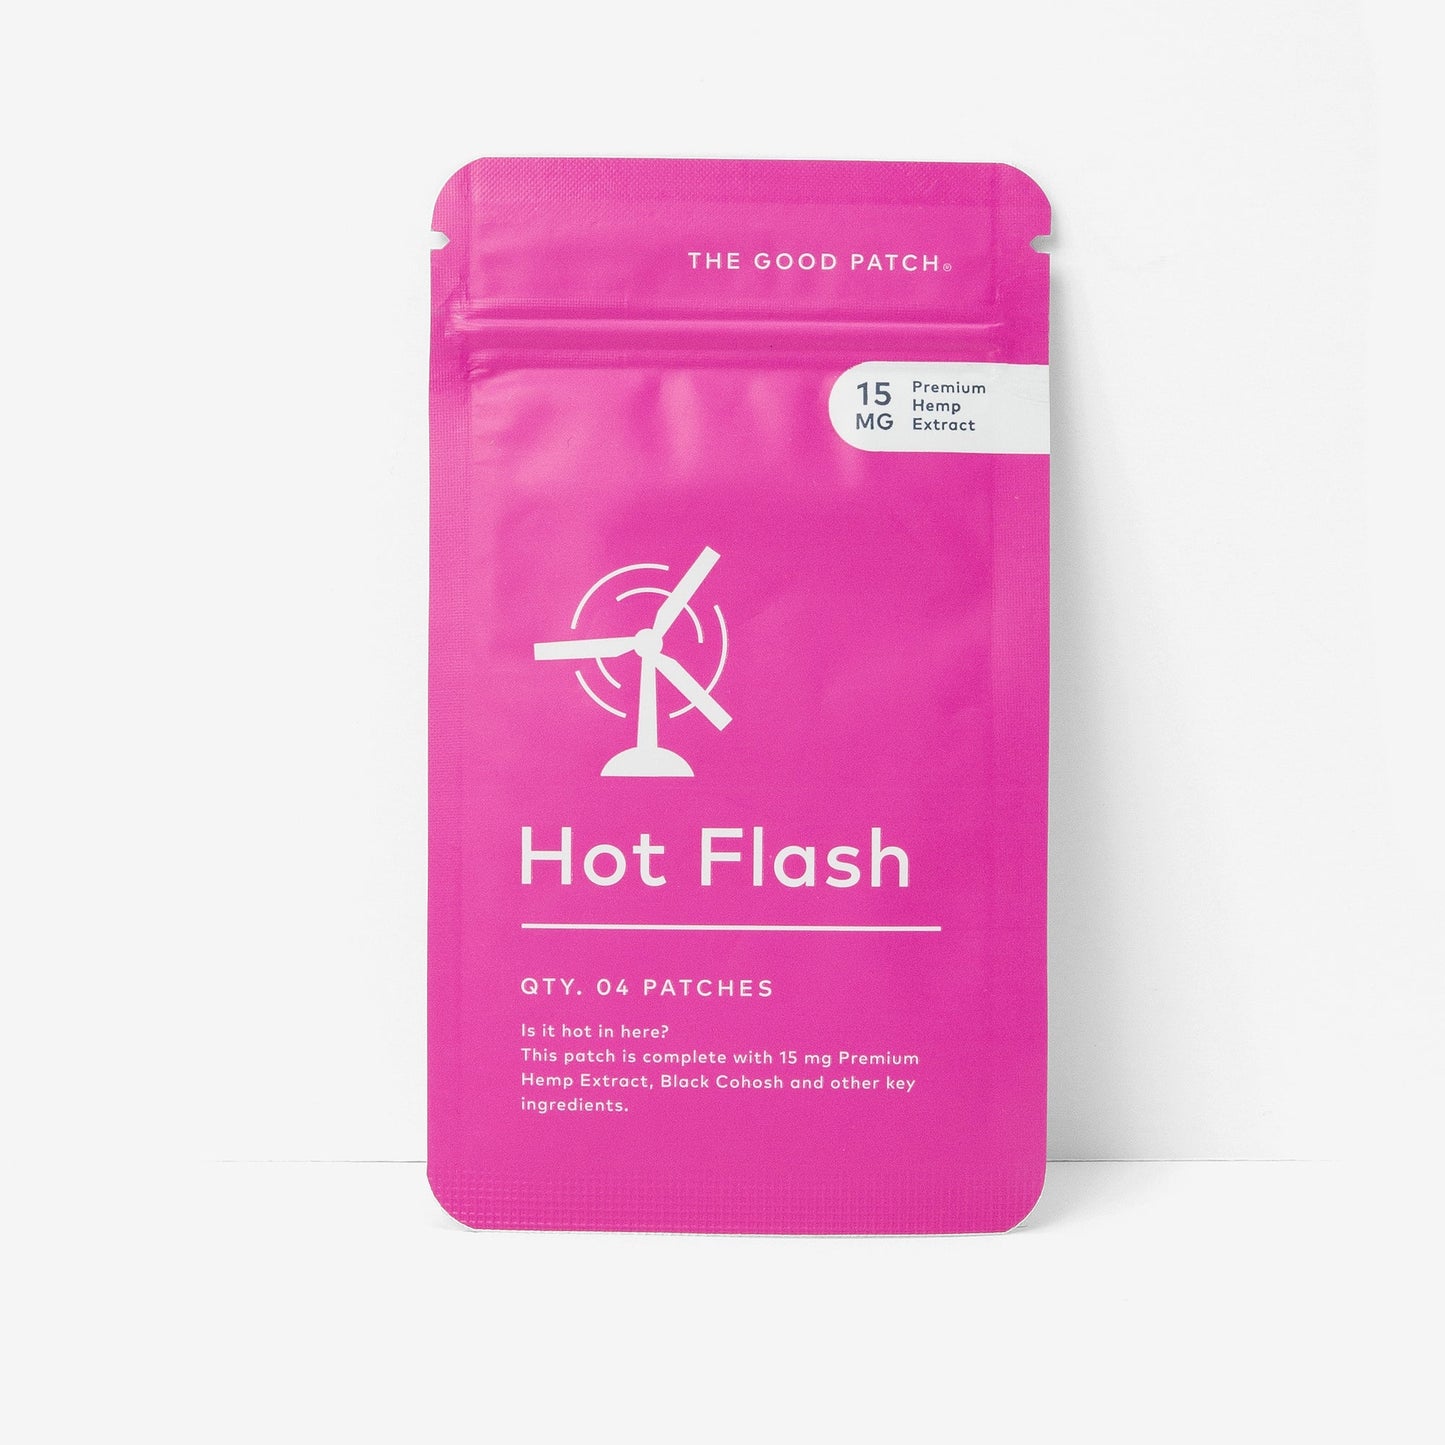 Hot Flash - 4 count